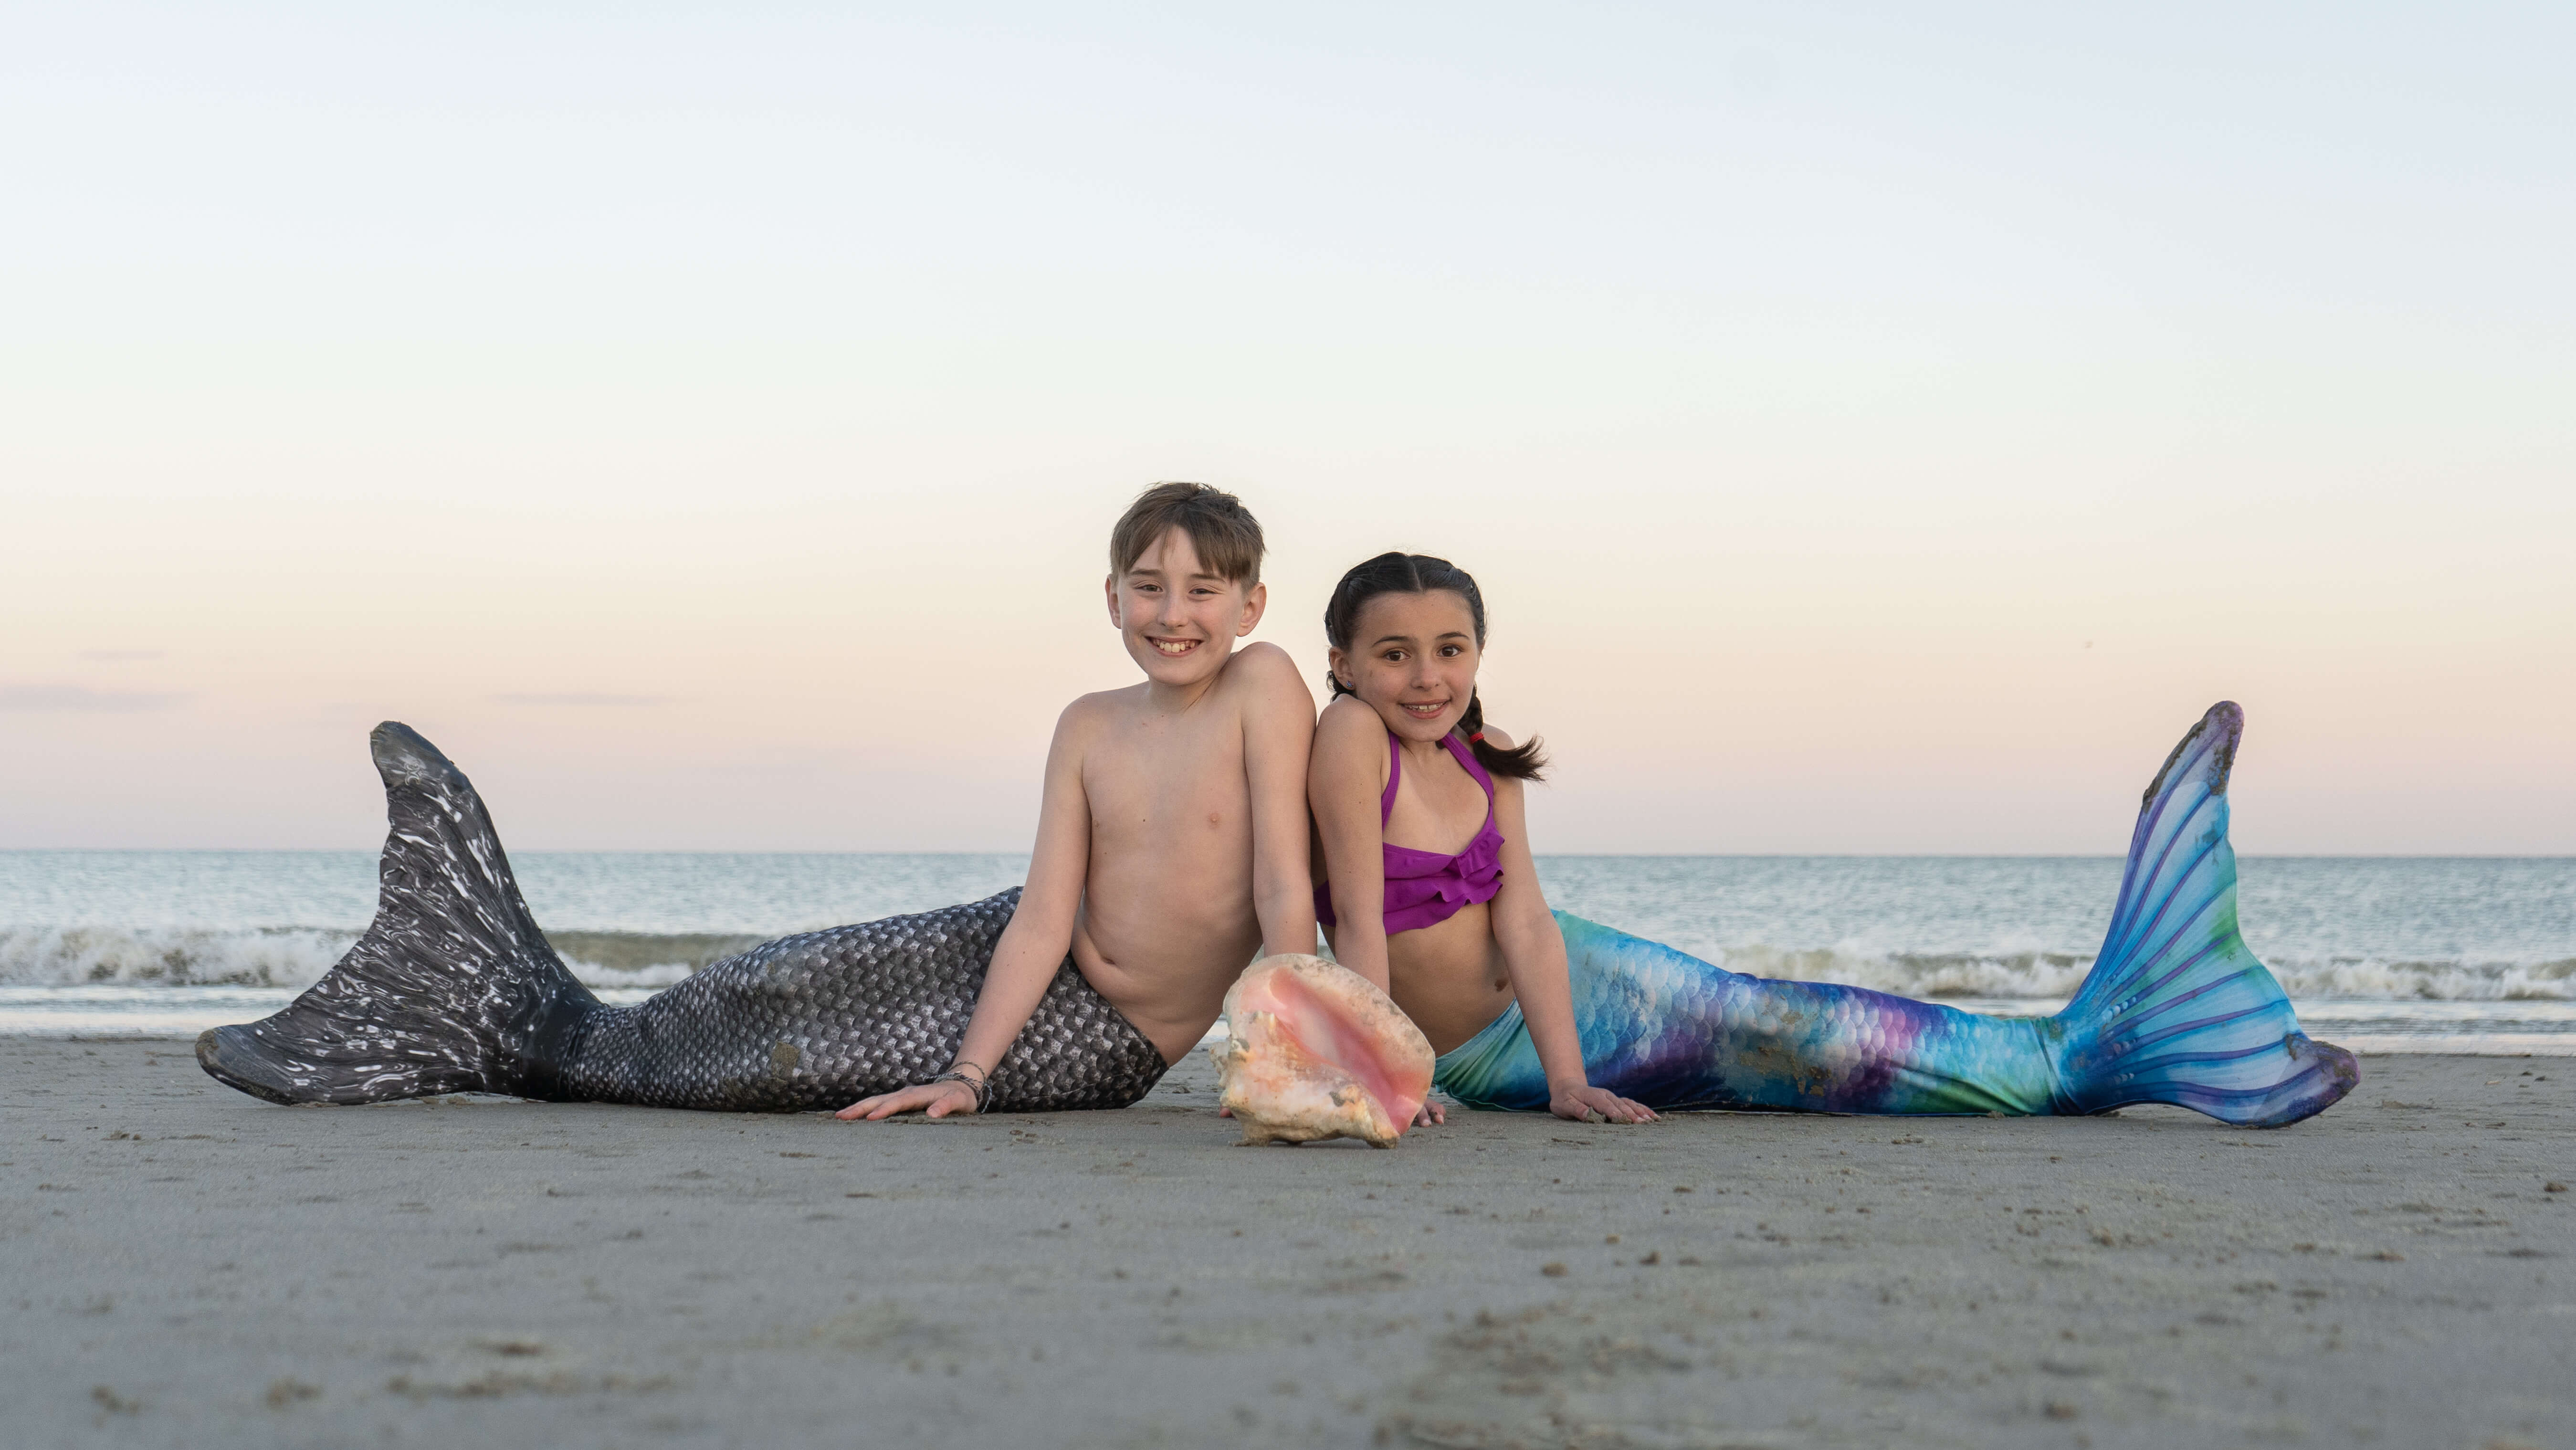 Brother and sister mermaids